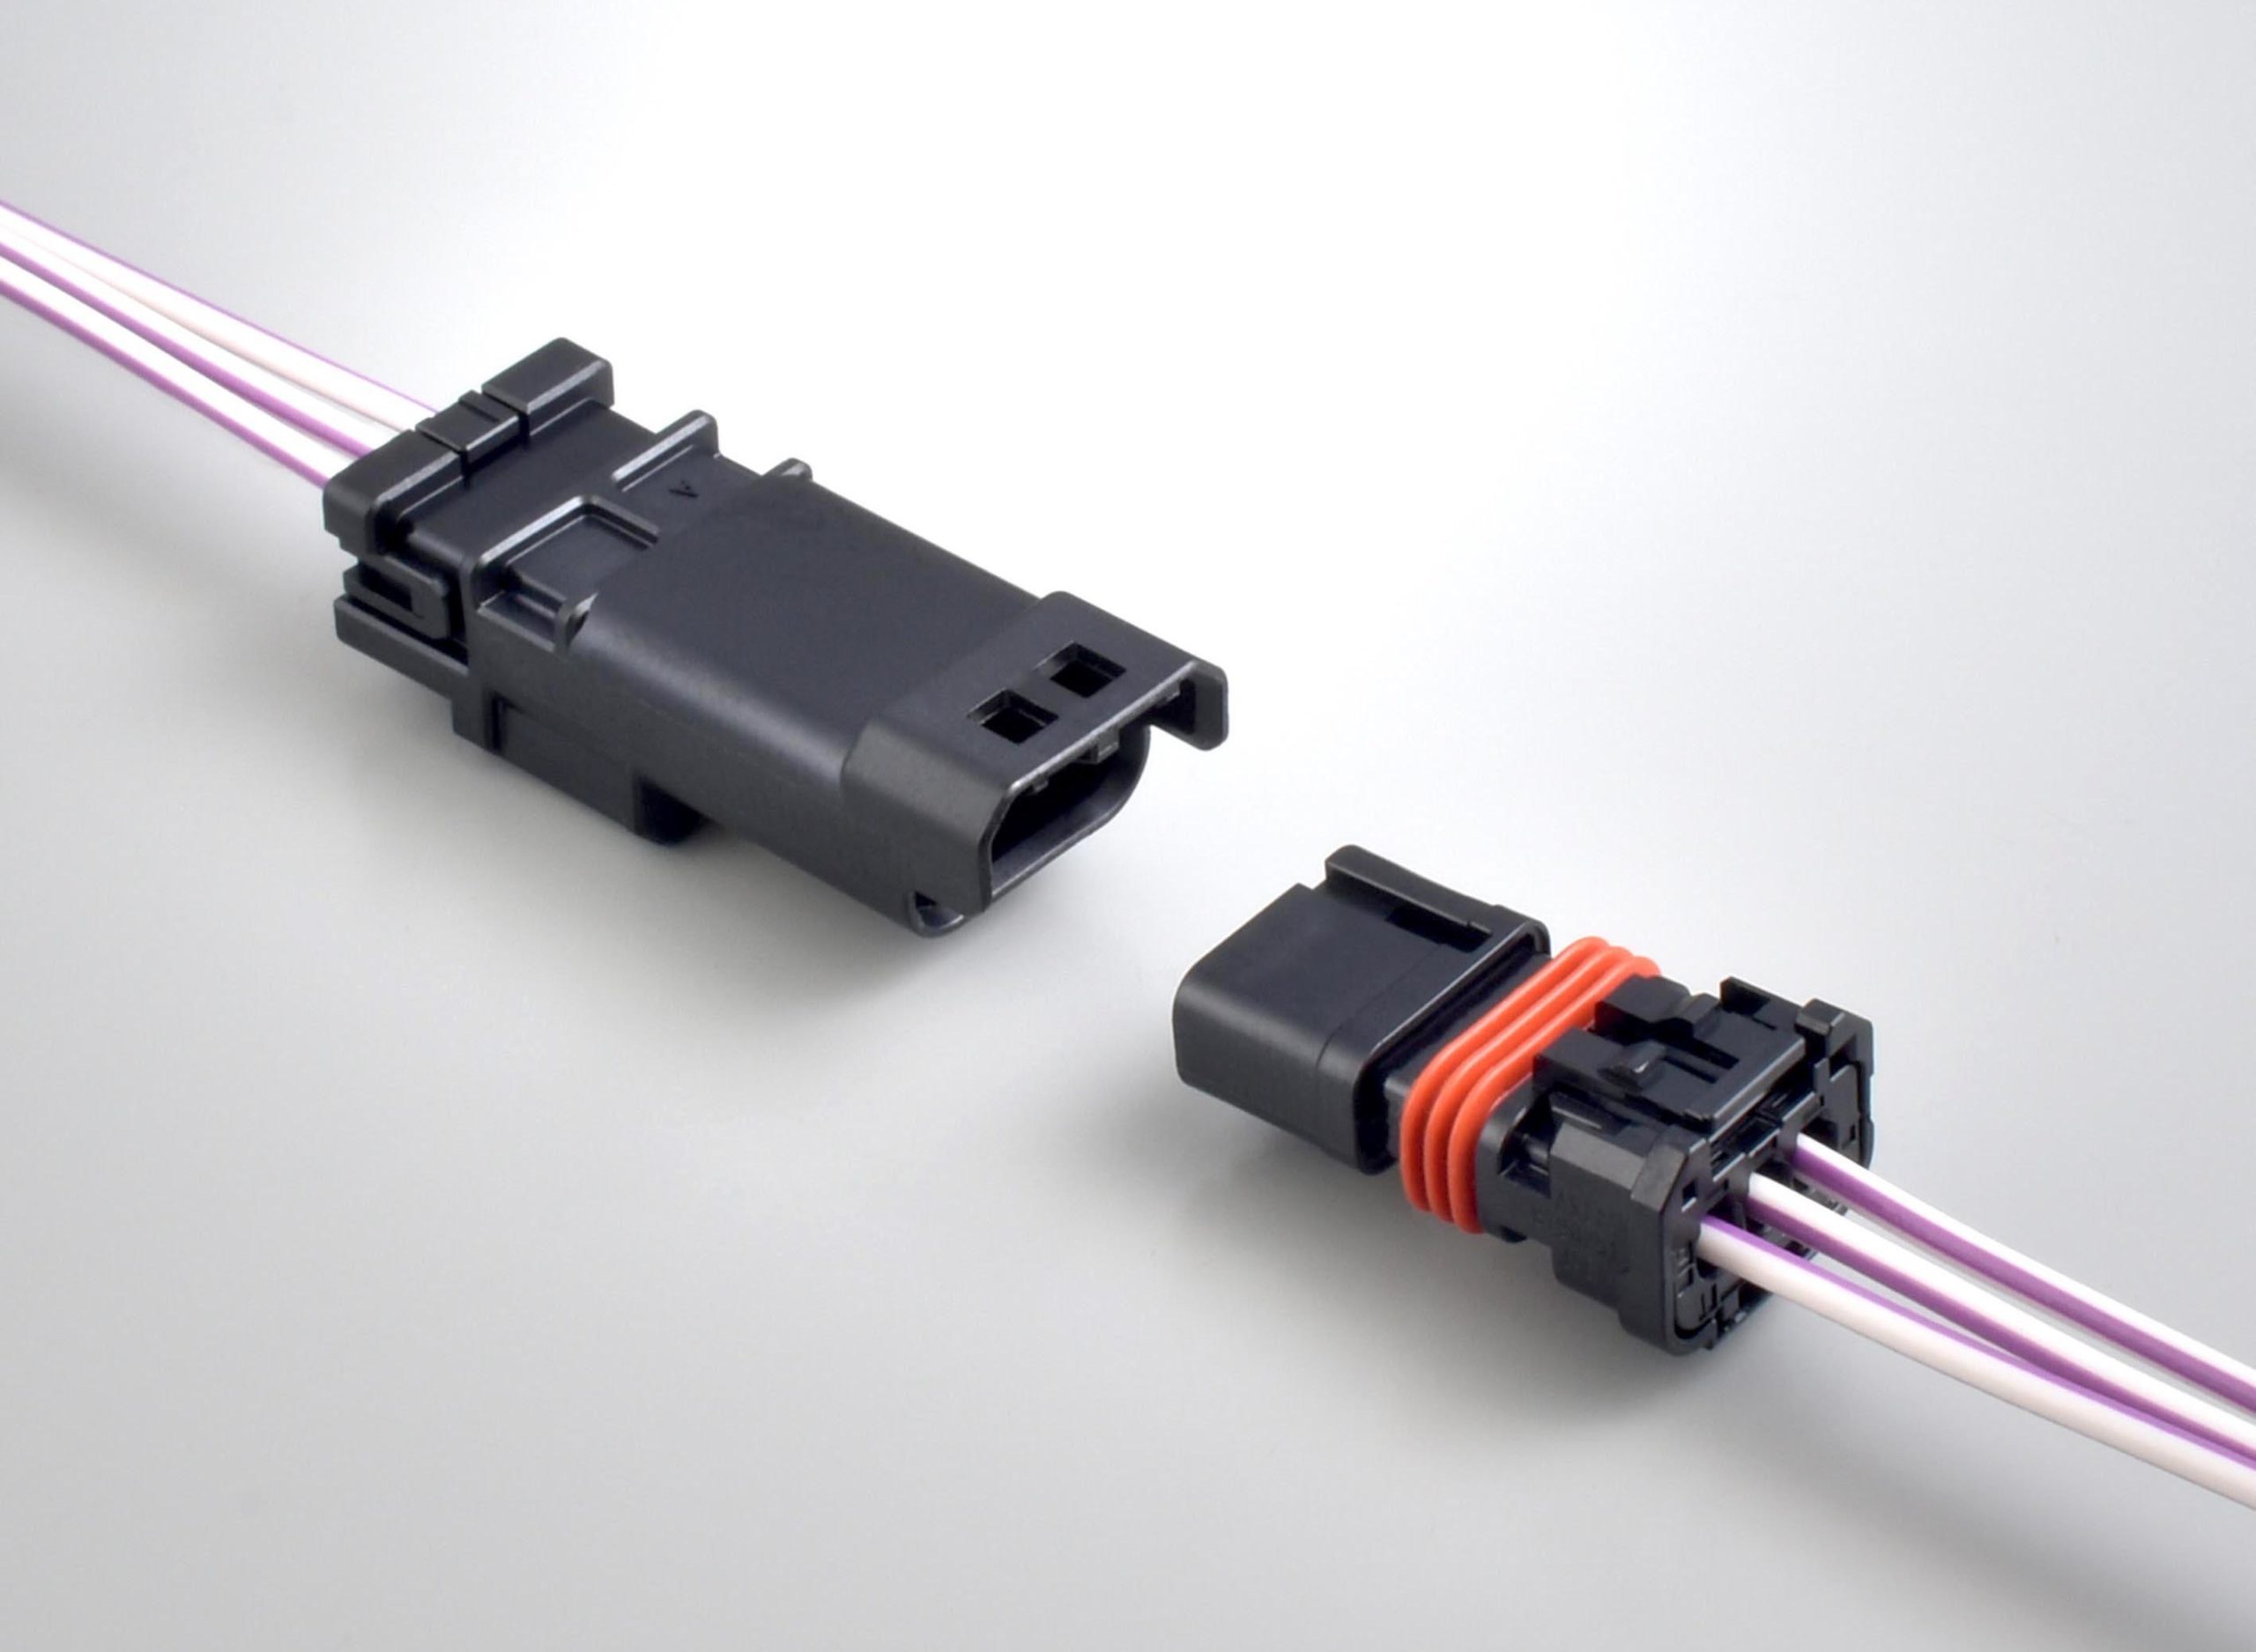 Sealed Wire-to-Wire Automotive Connectors from JAE